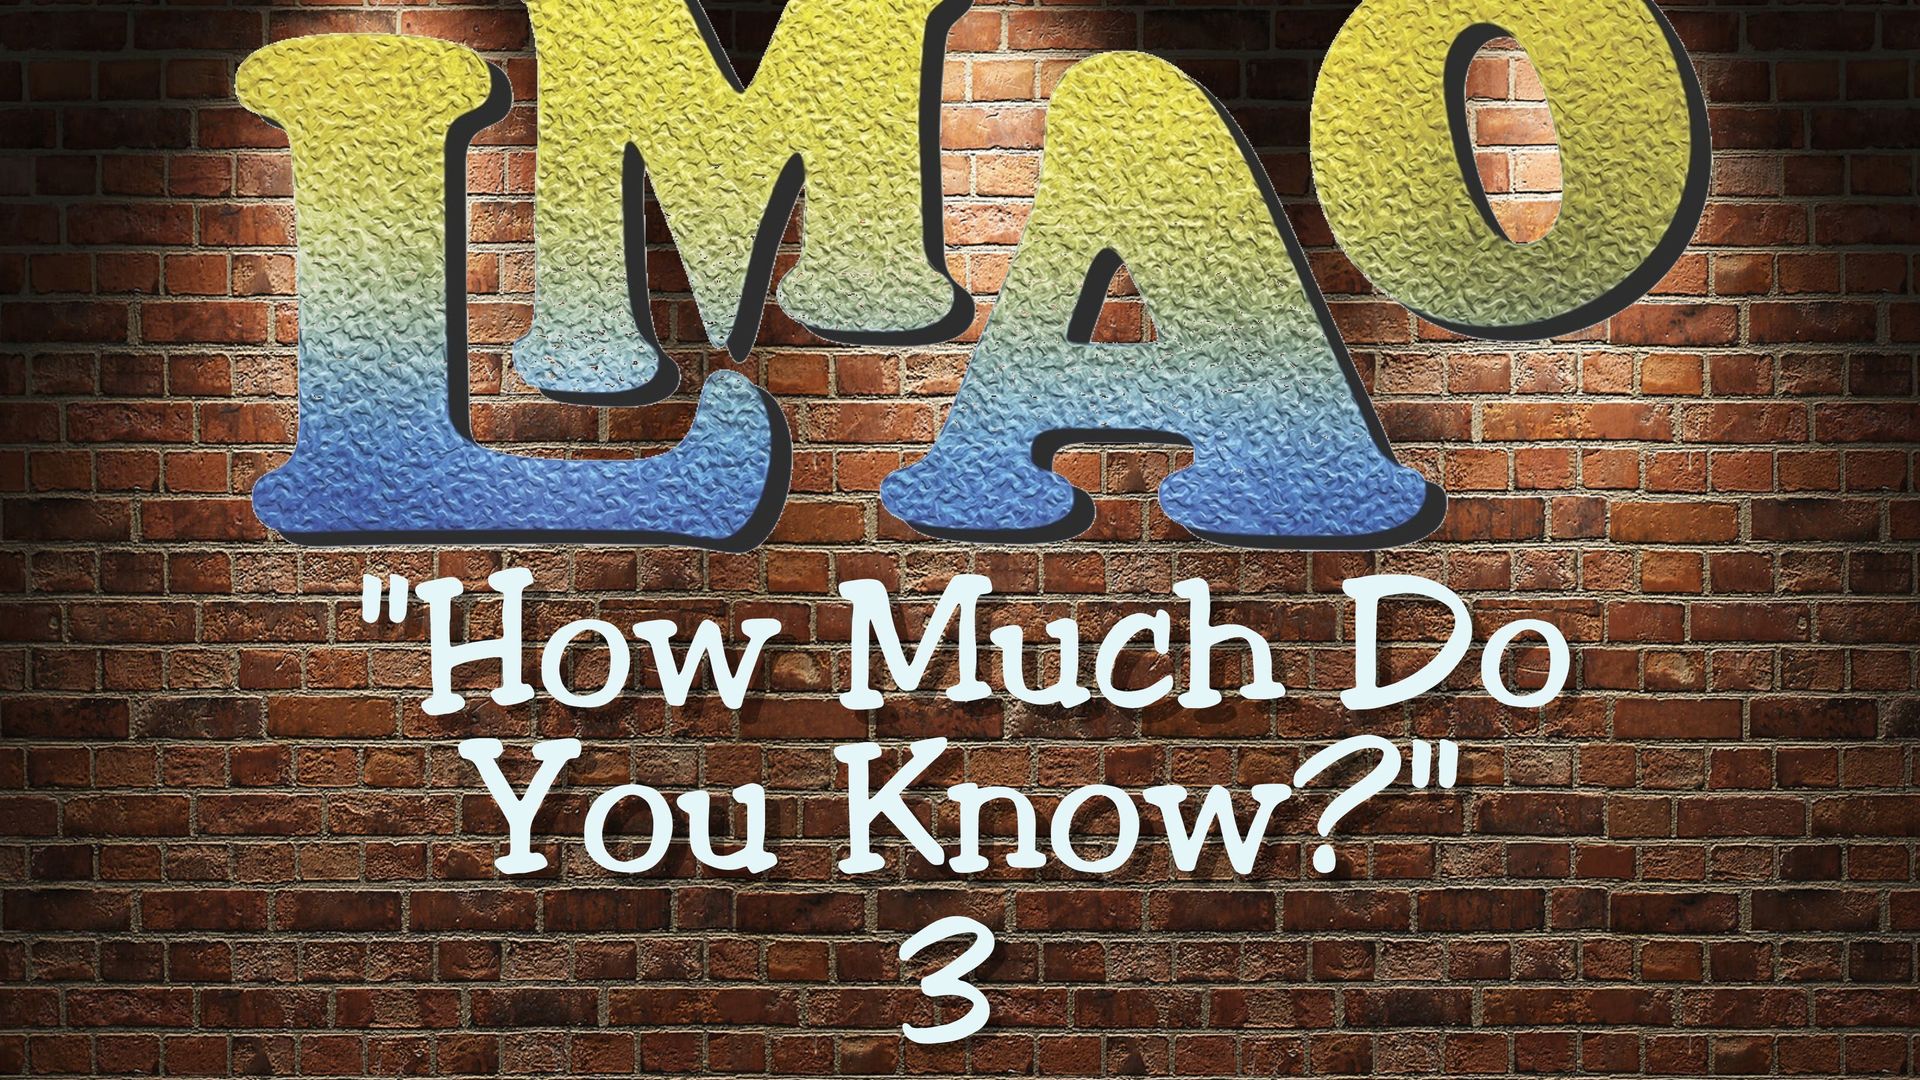 LMAO - How much do YOU know? Episode 3